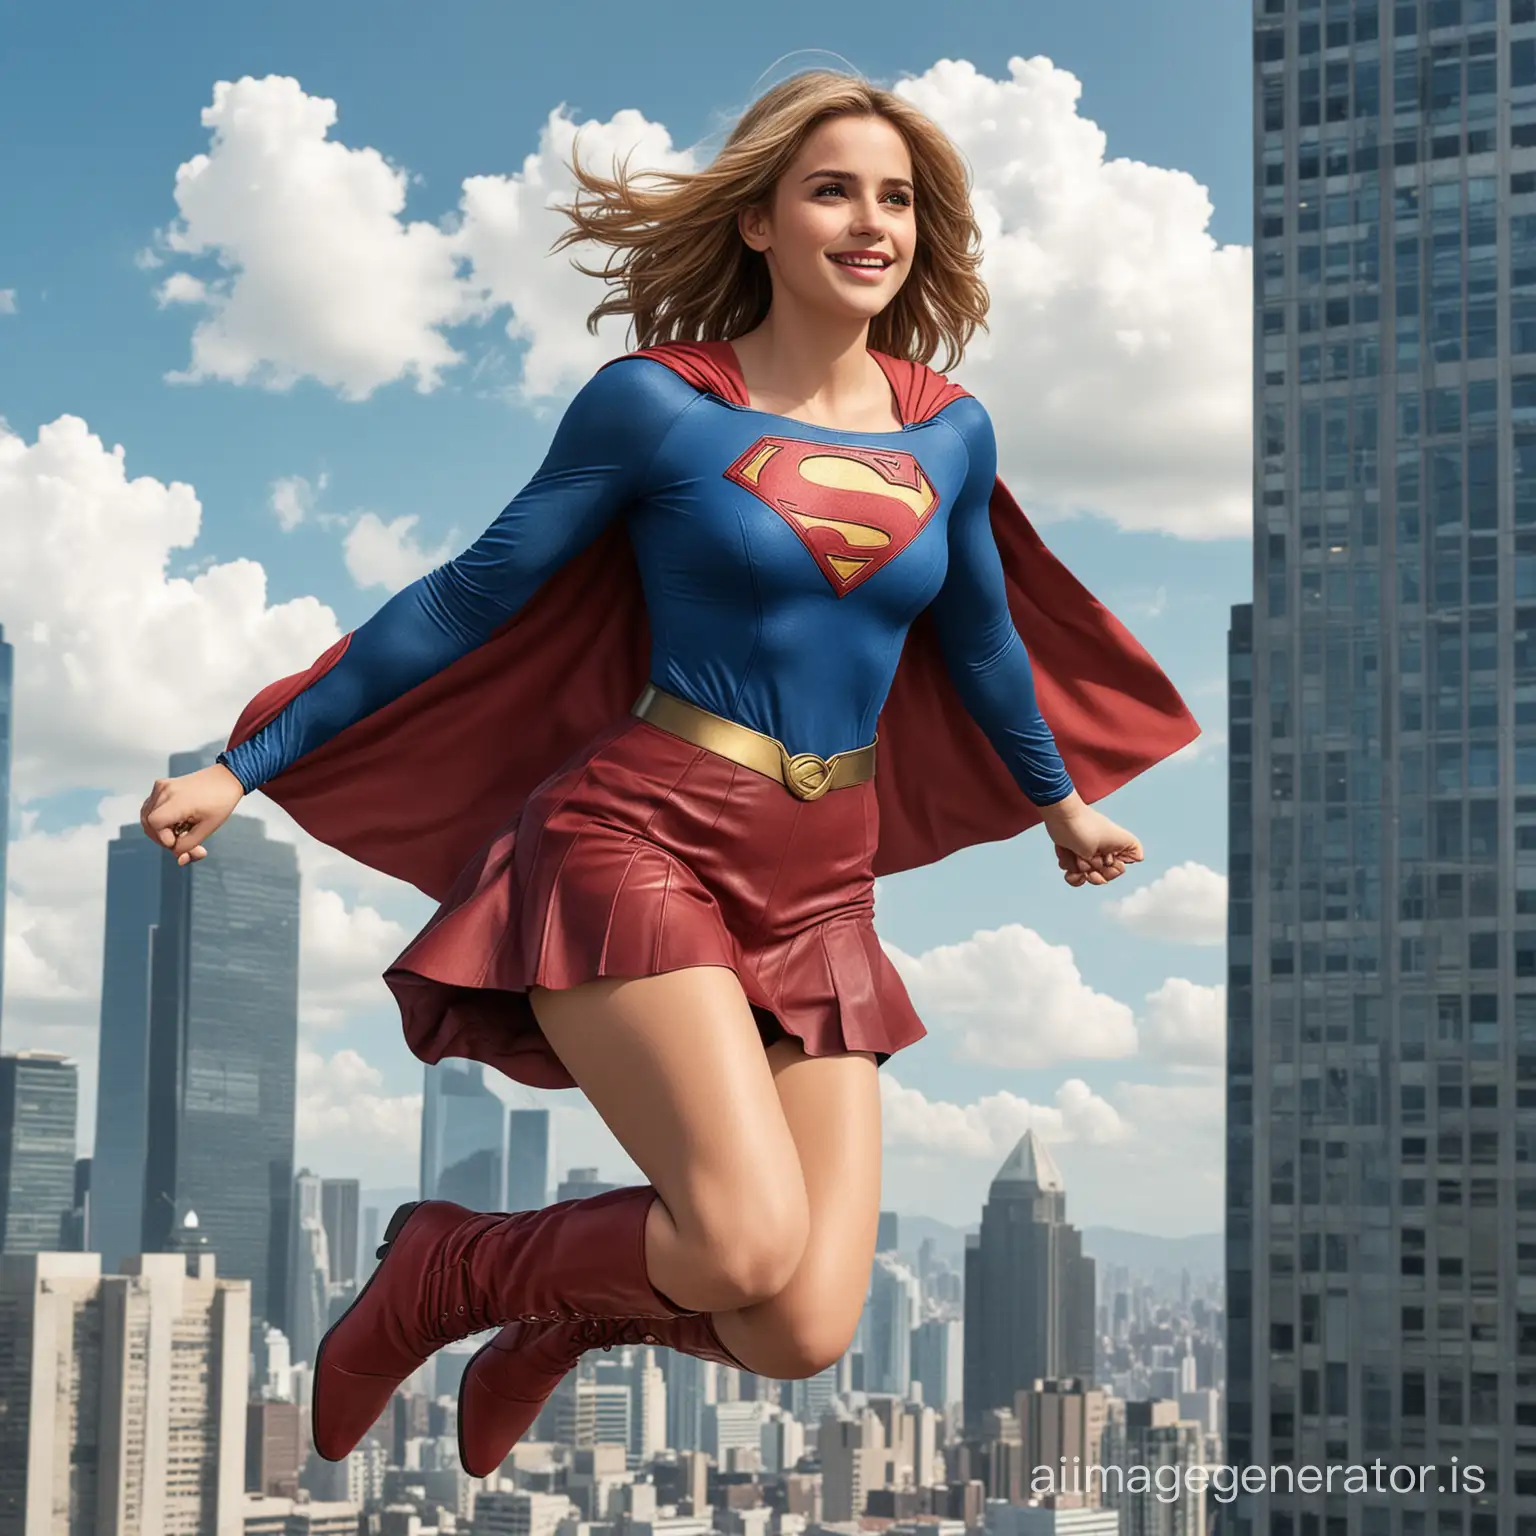 Joyful-Supergirl-Smiling-Heroine-in-Red-Boots-and-Skirt